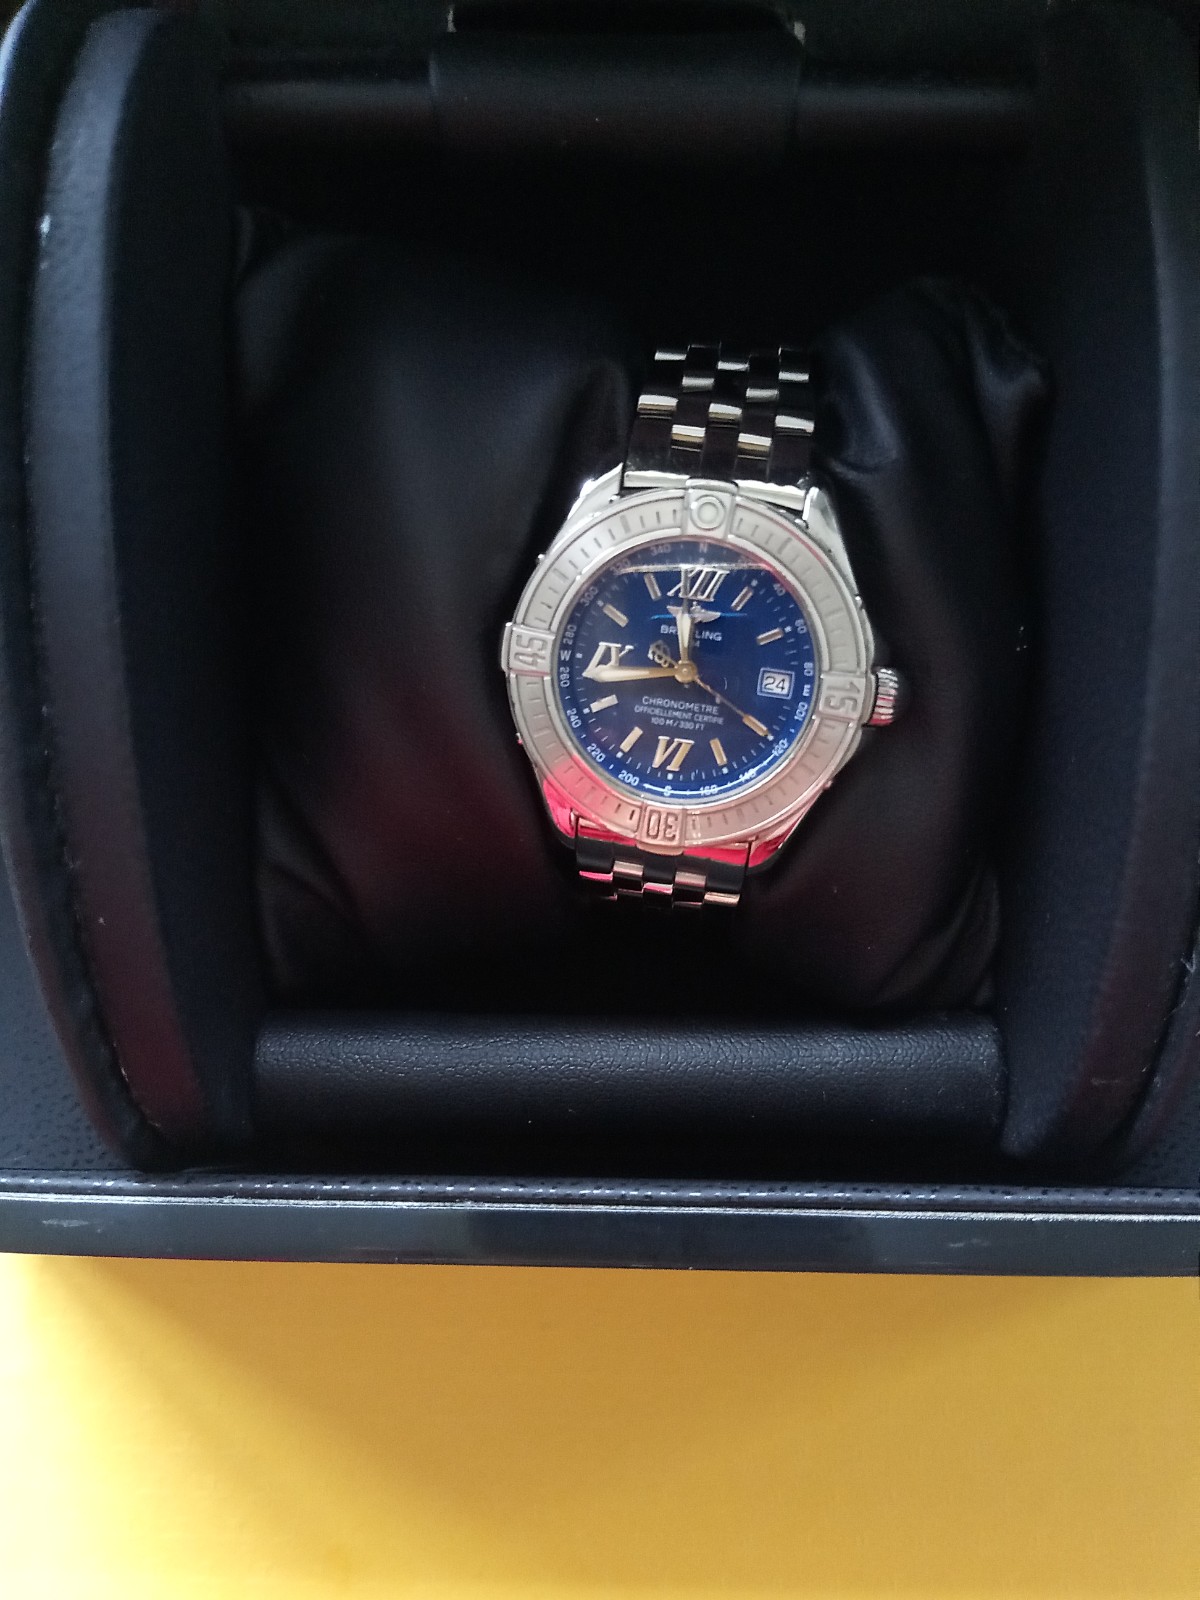 Ladies Cockpit Watch with Blue Face - Image 5 of 5